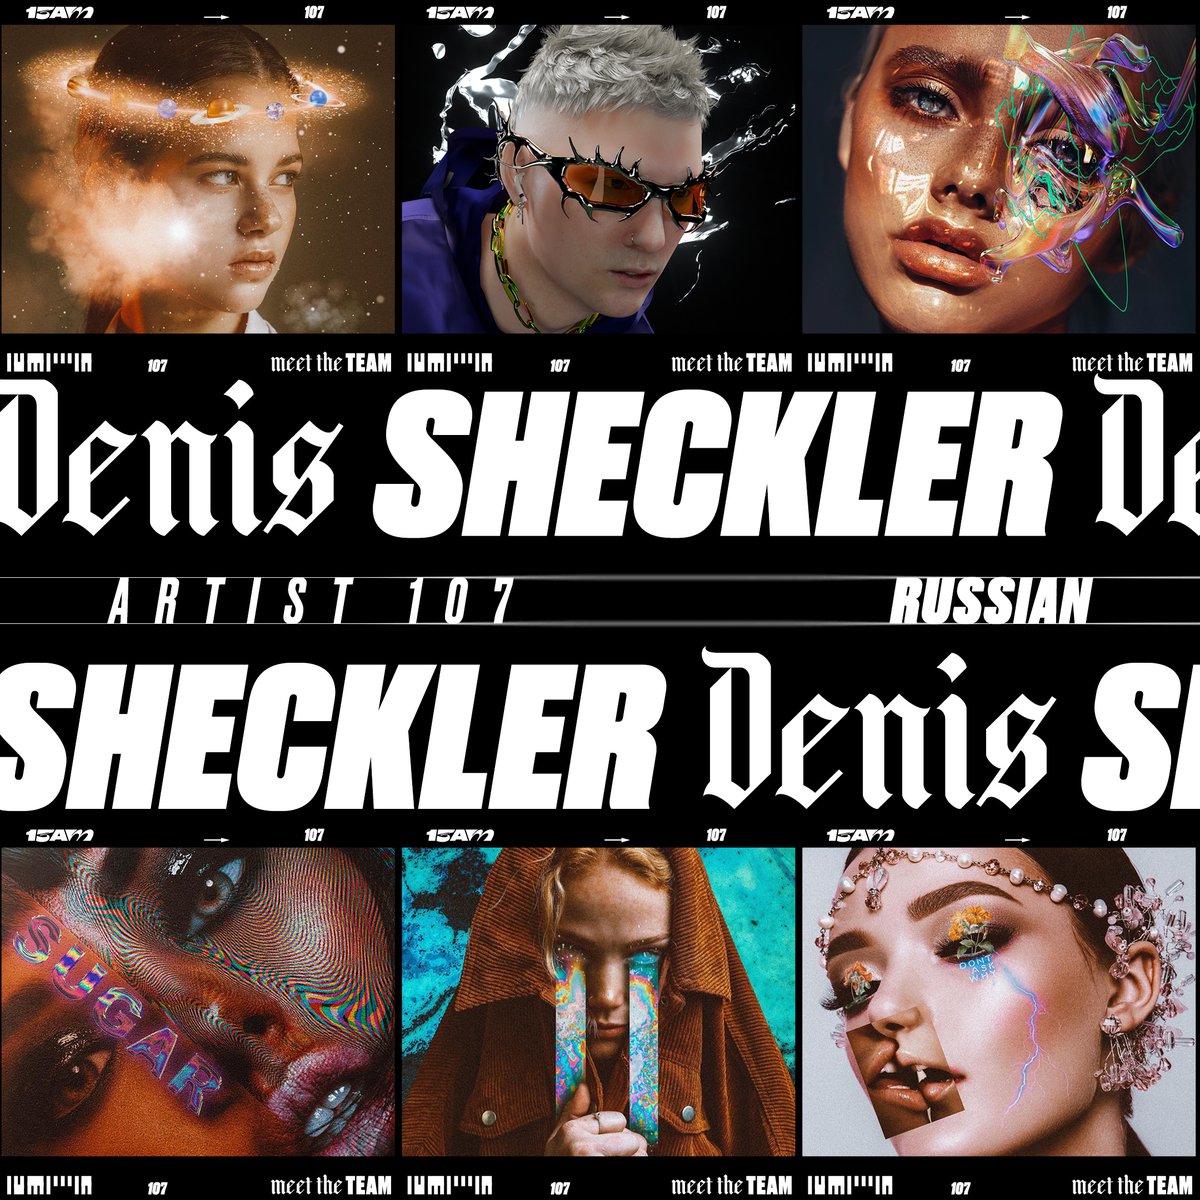 Meet the Team. Artist 107 - @pillsforskills Denis Sheckler, a Russian digital artist, delves into the realms of curiosity and self-teaching, his surreal and psychedelic collages offer viewers a tantalizing glimpse into the bizarre and ethereal realms of his imagination.